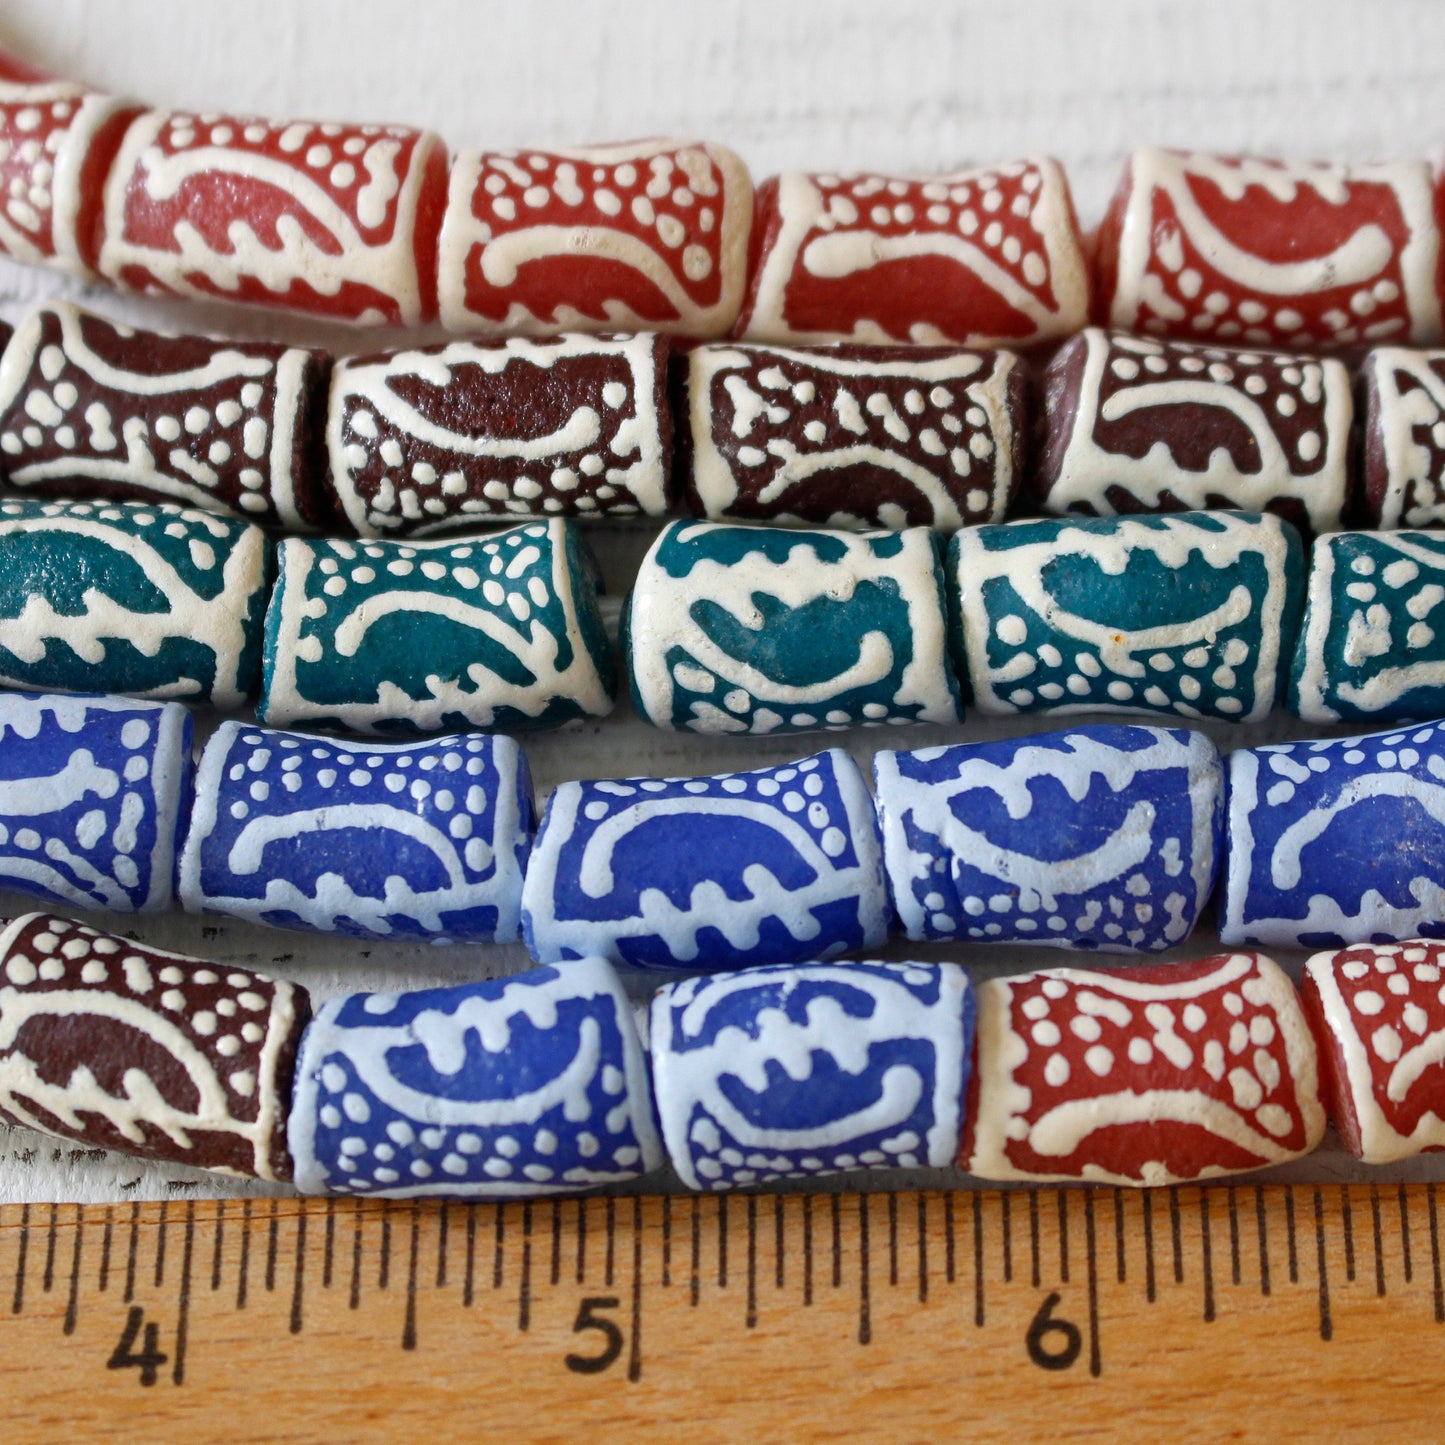 Painted Tube Beads From Ghana Africa - Large Hole - Mixed Strand - 32 Beads